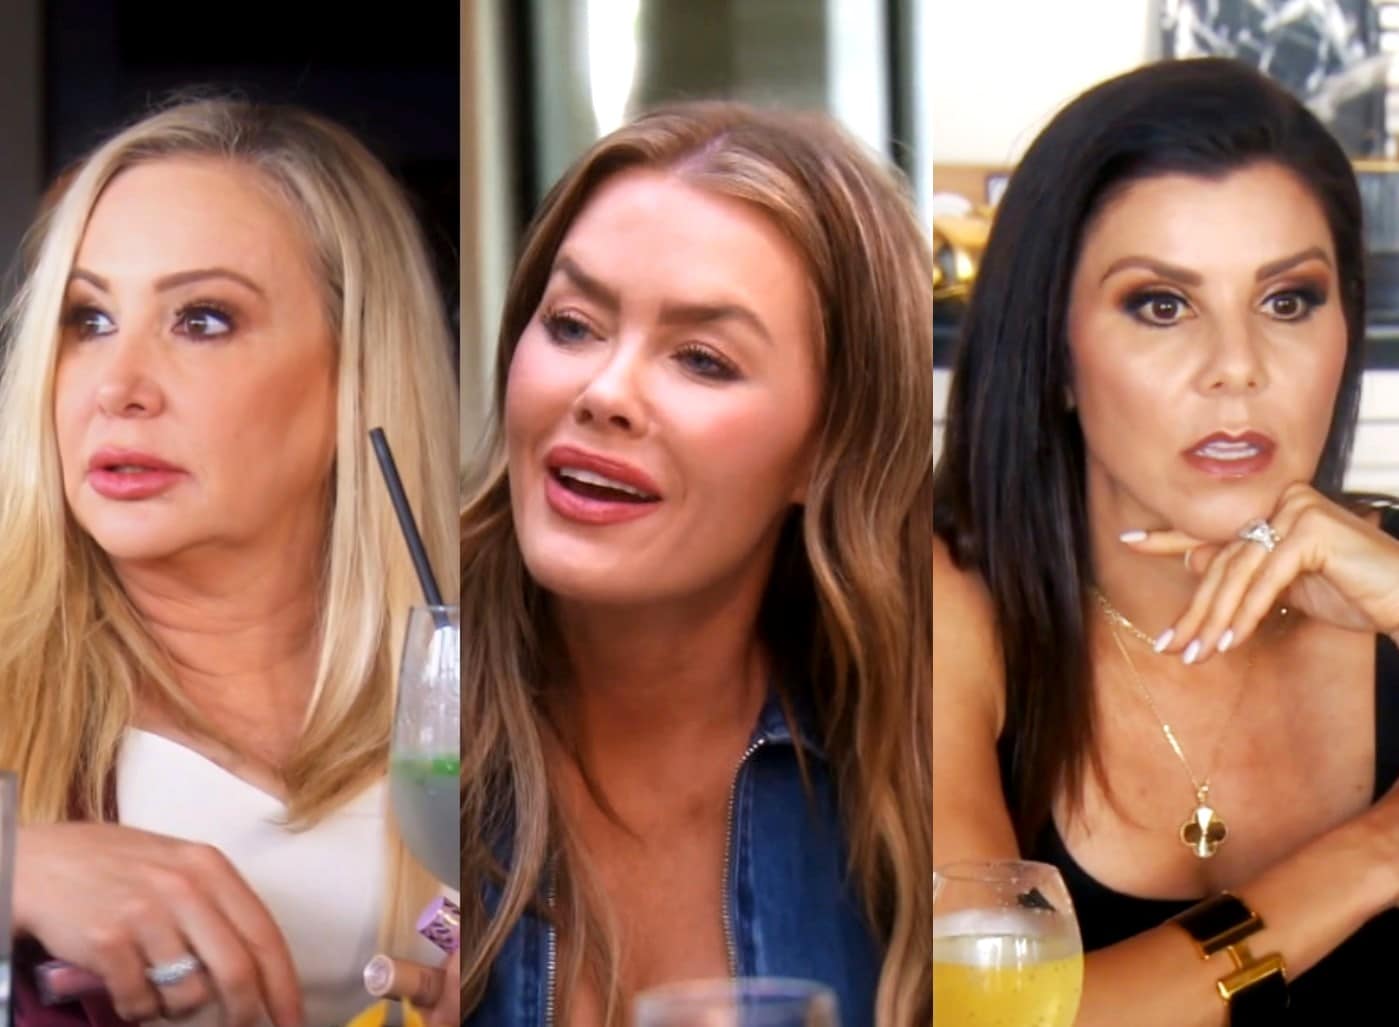 RHOC Premiere Recap: Shannon Alleges Nicole Sued Dr. Dubrow as Heather Throws Fabulous Party, Plus Dr. Jen and Noella Are Introduced